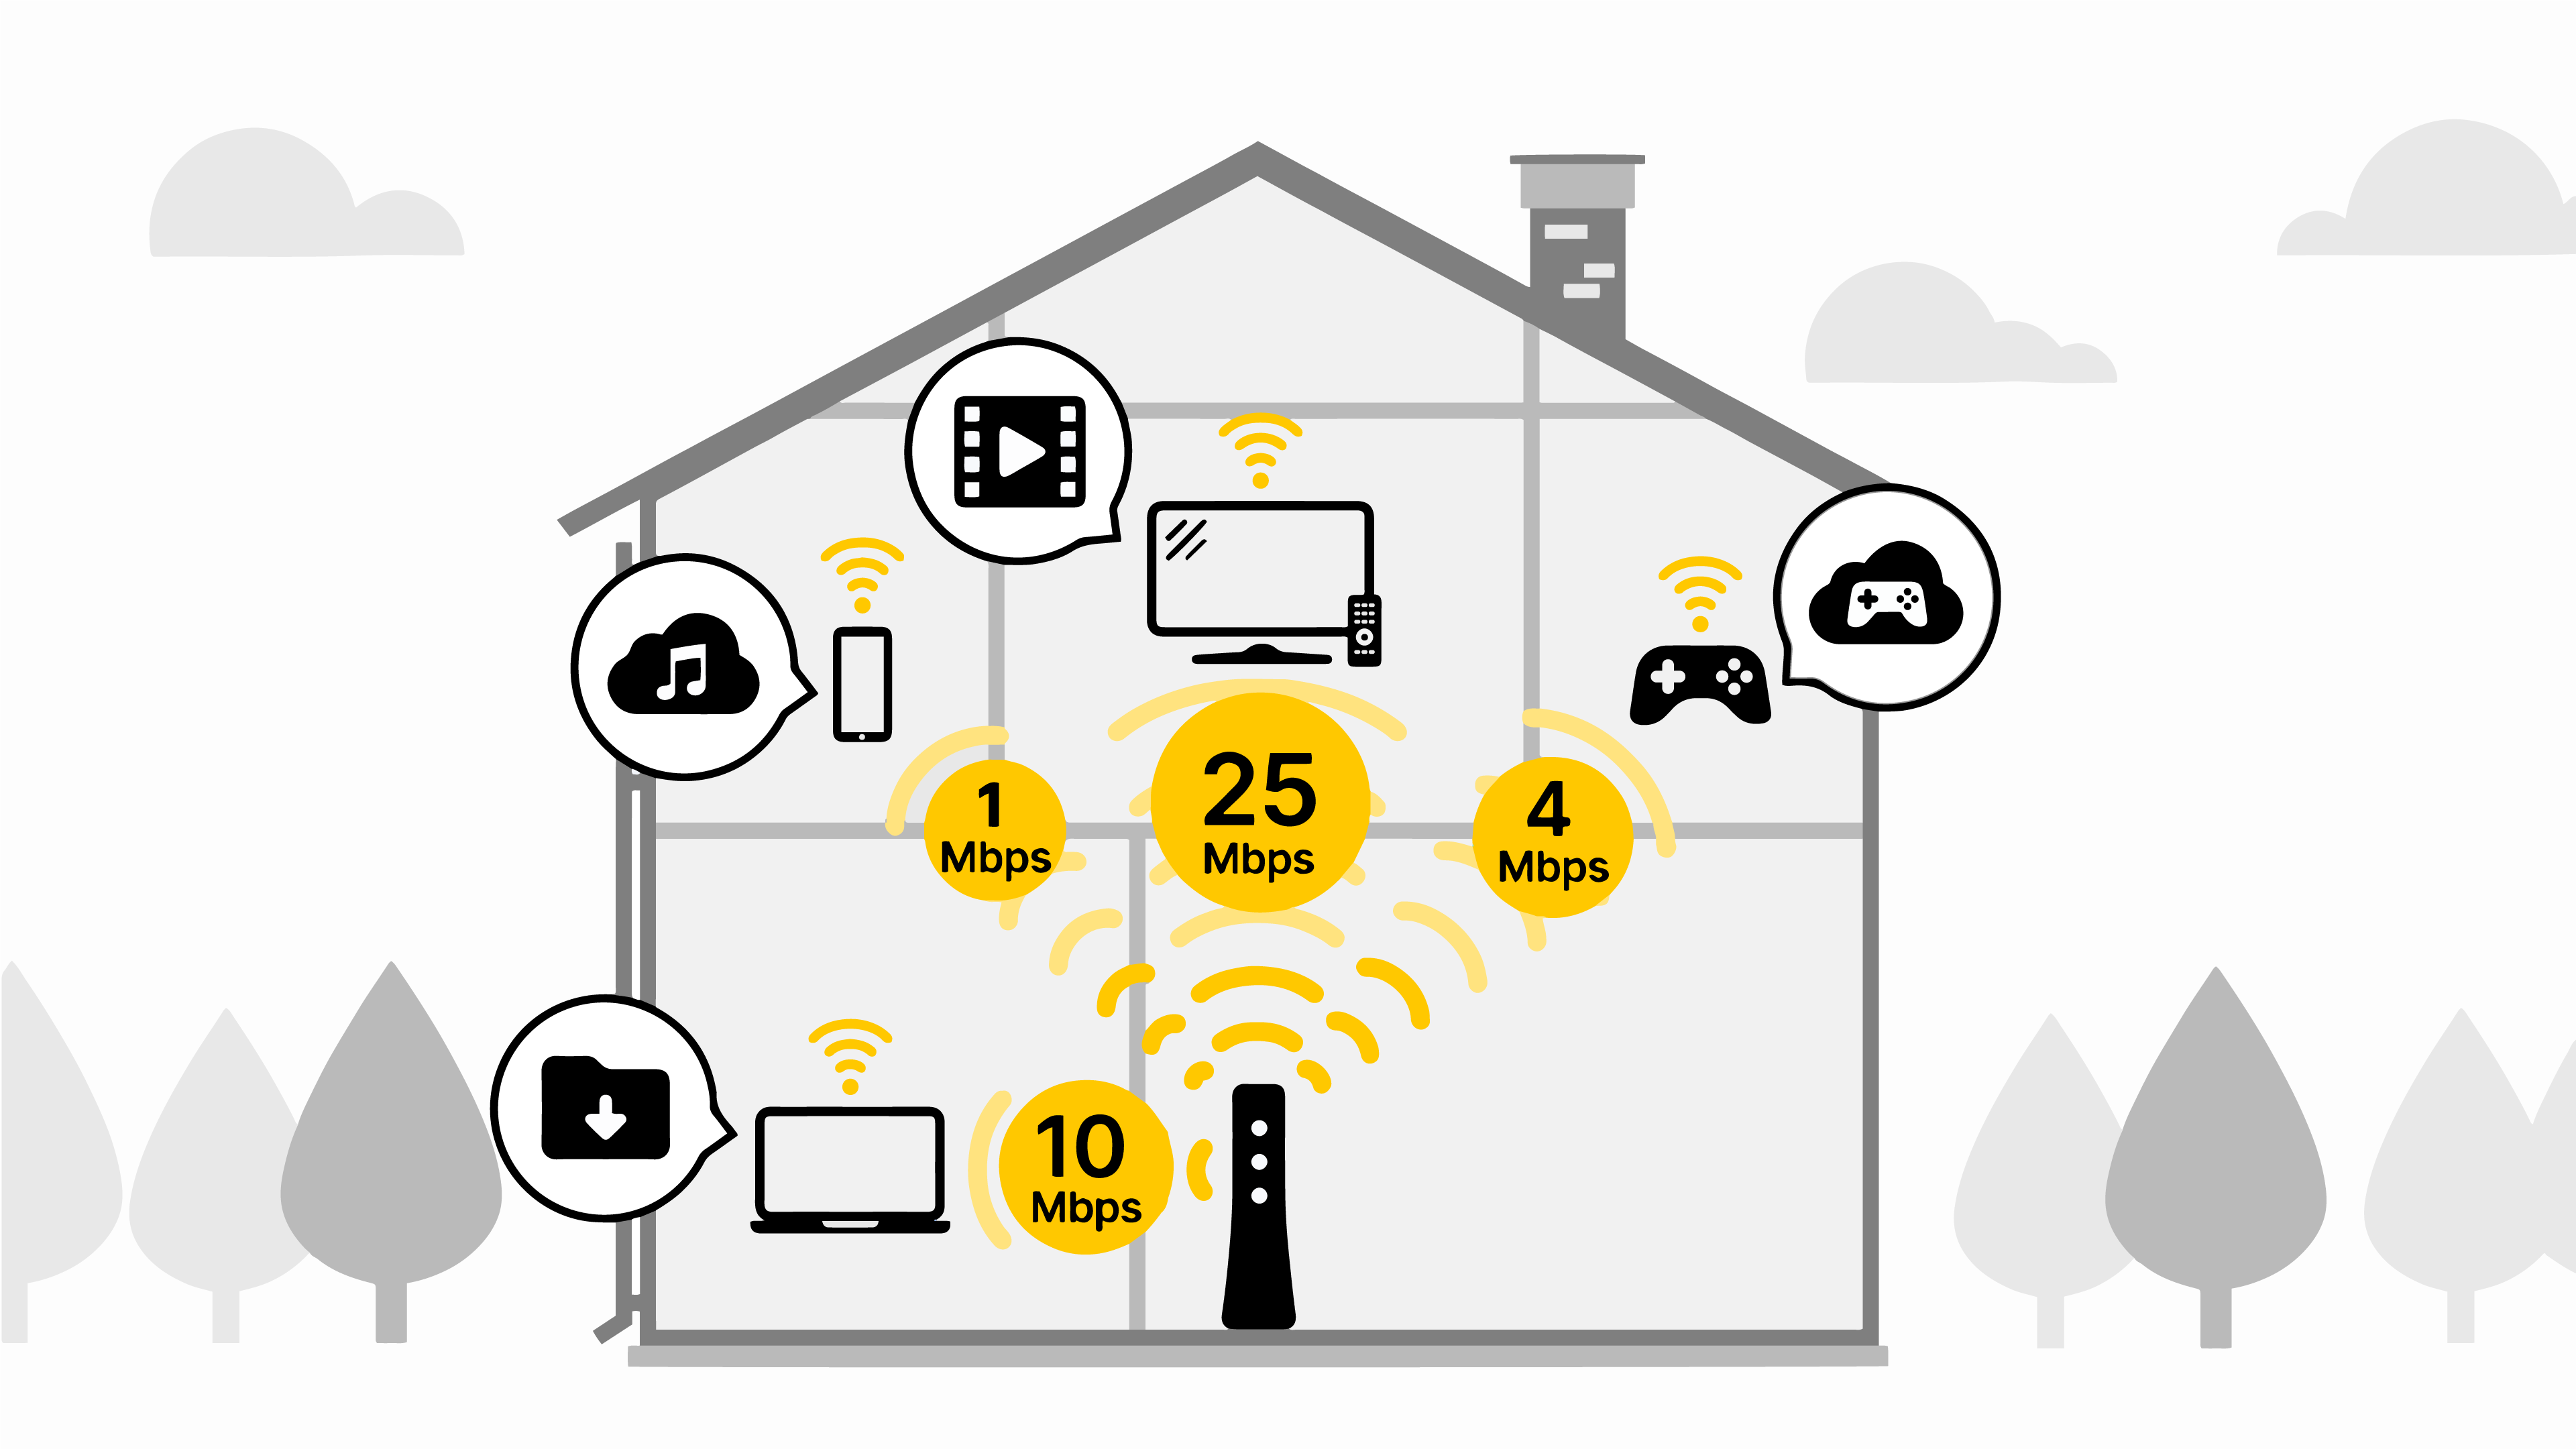 Illustration of a house showing different internet speeds needed for different devices